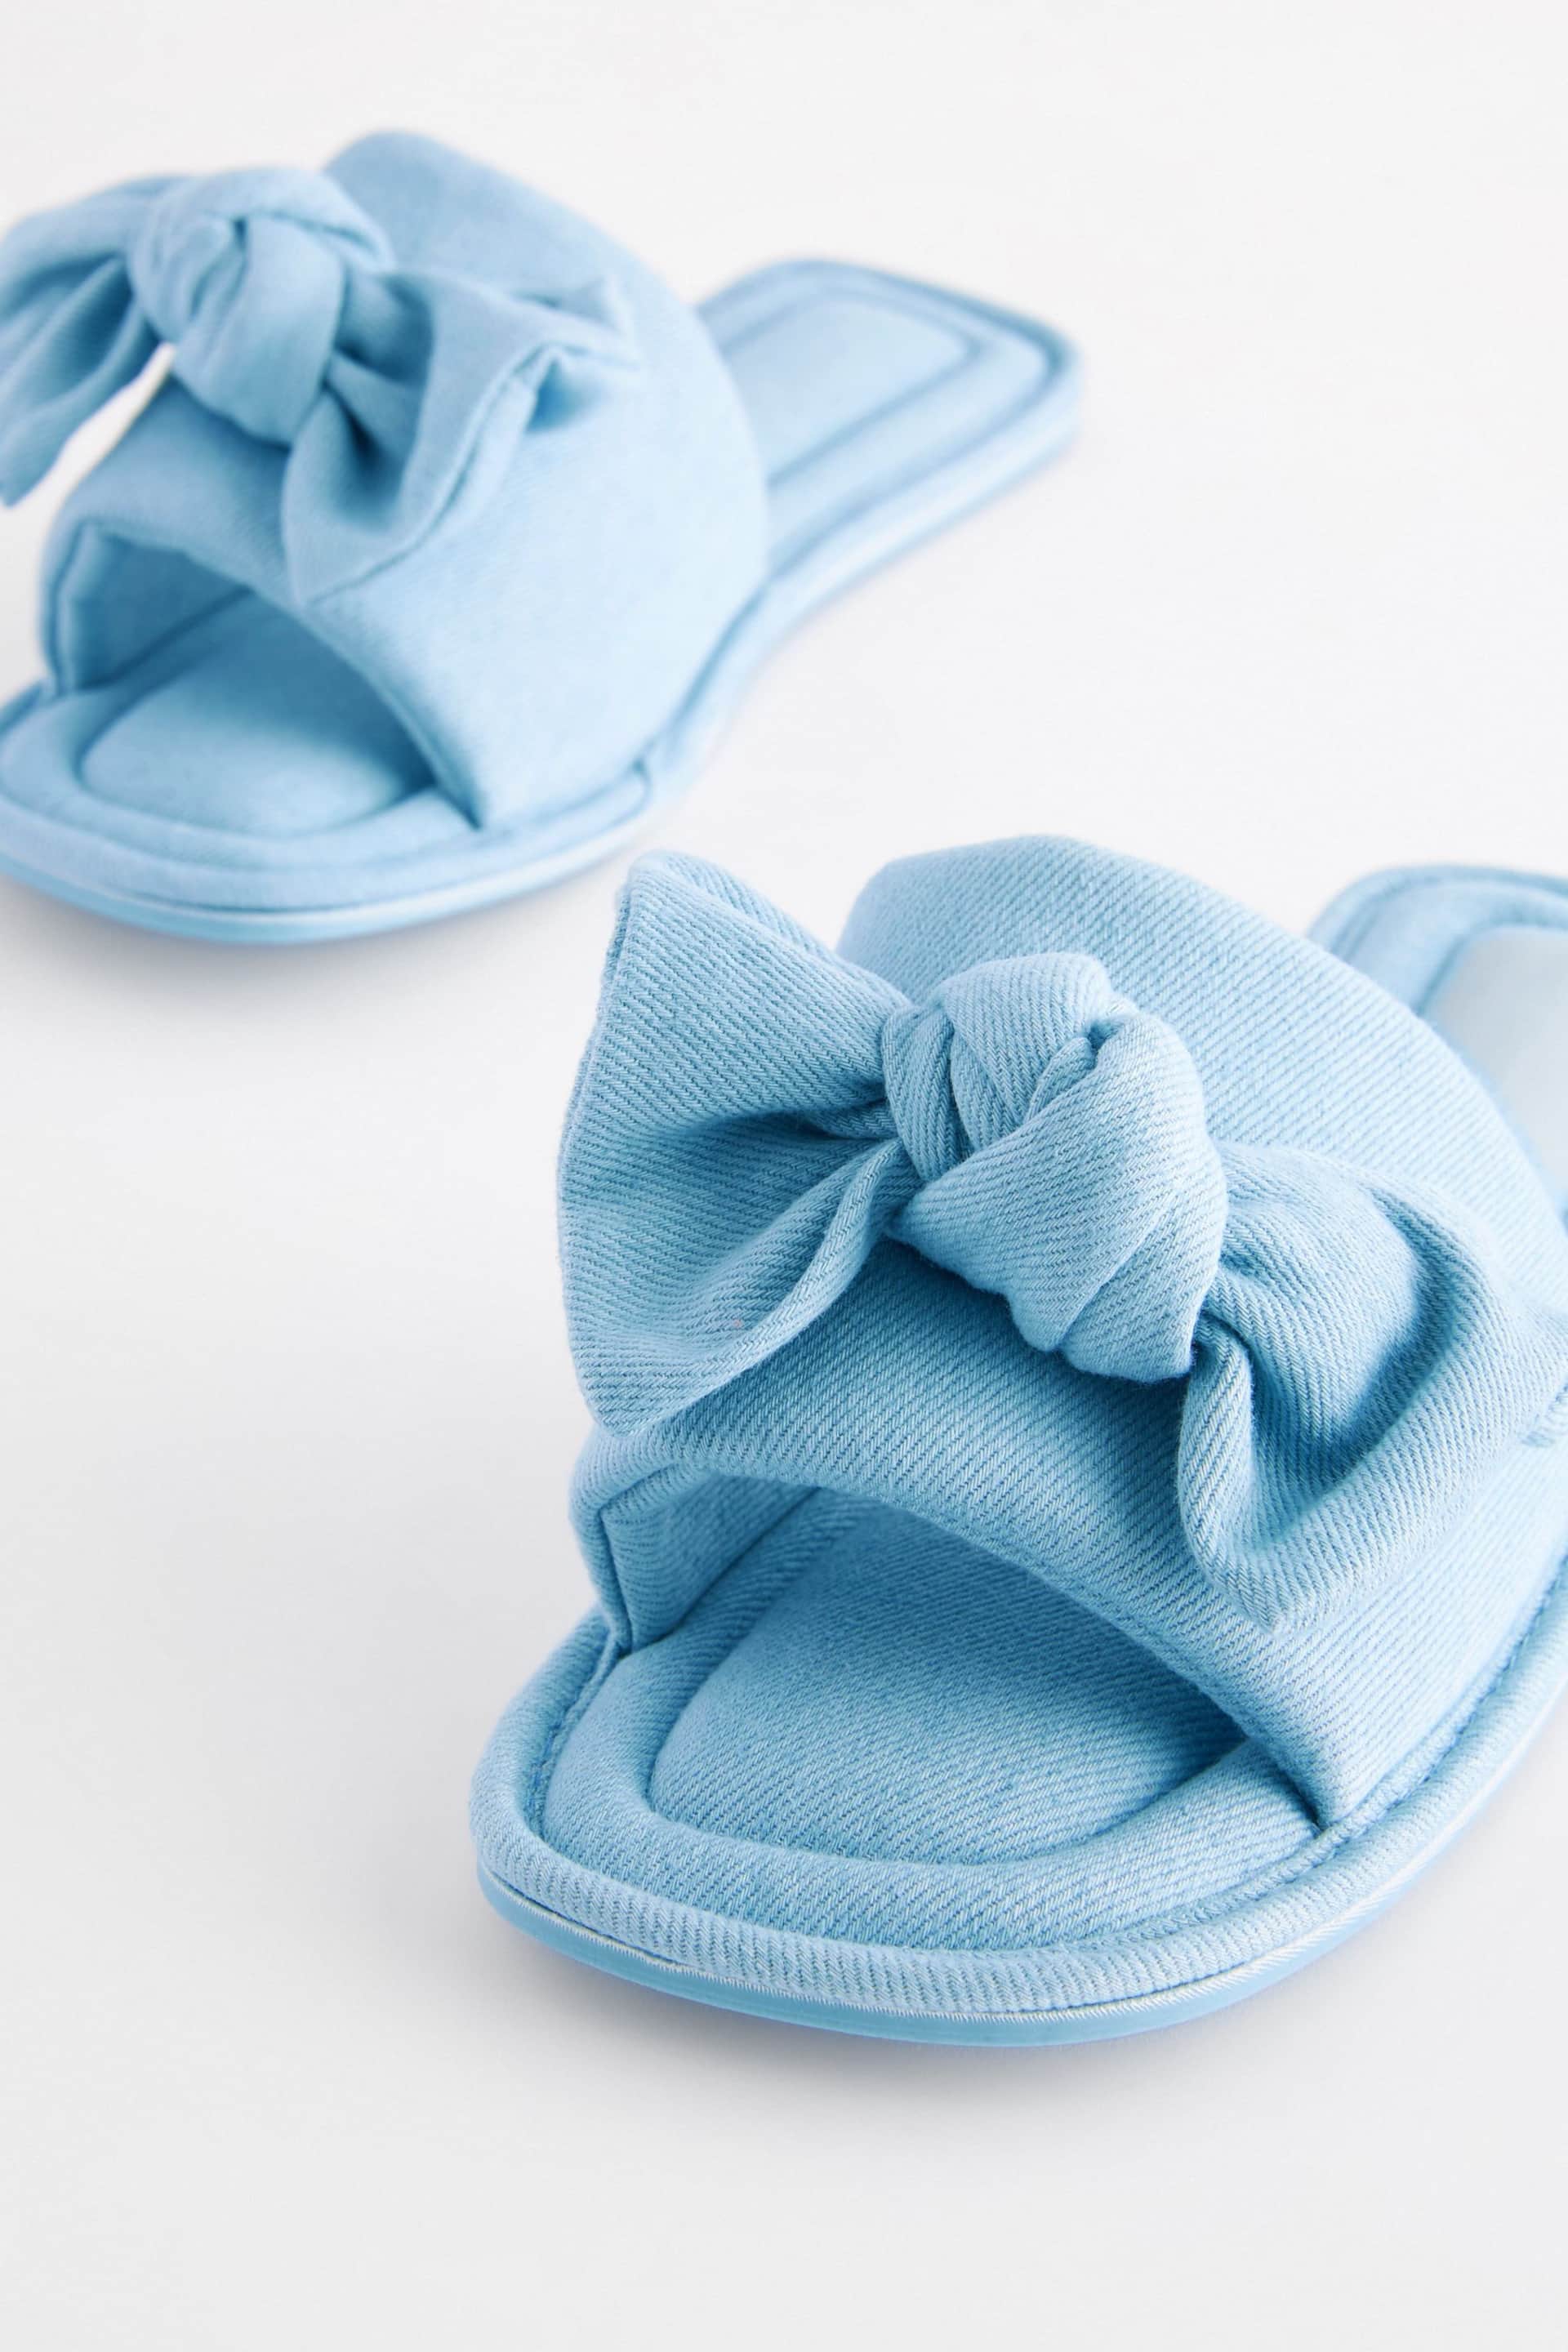 Blue Bow Mule Slippers - Image 6 of 7